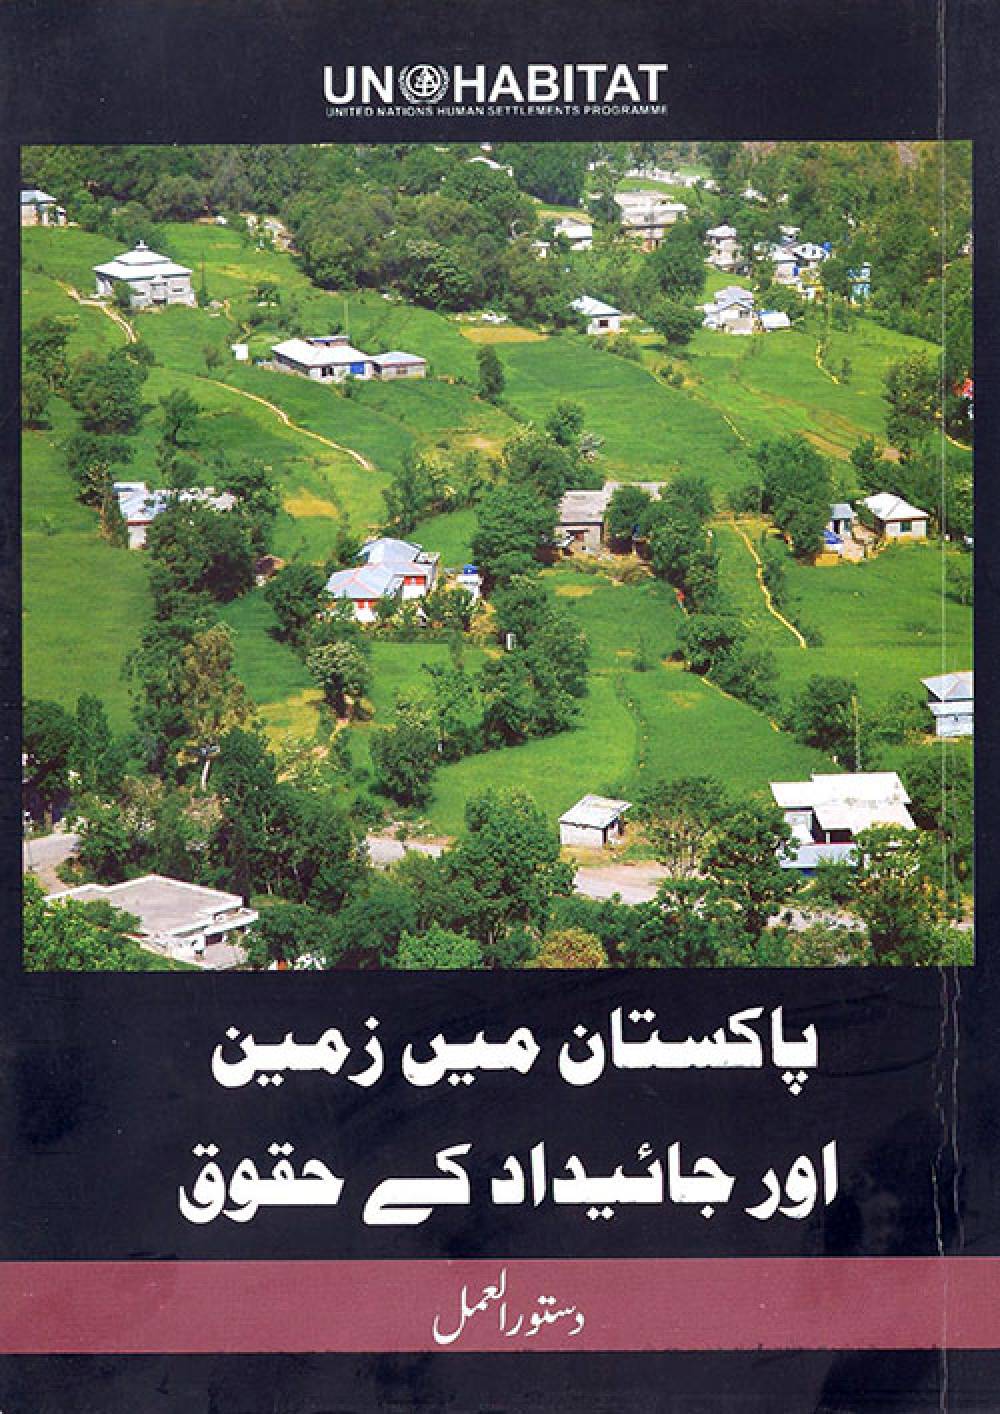 Land and Property Rights in Pakistan (Urdu)